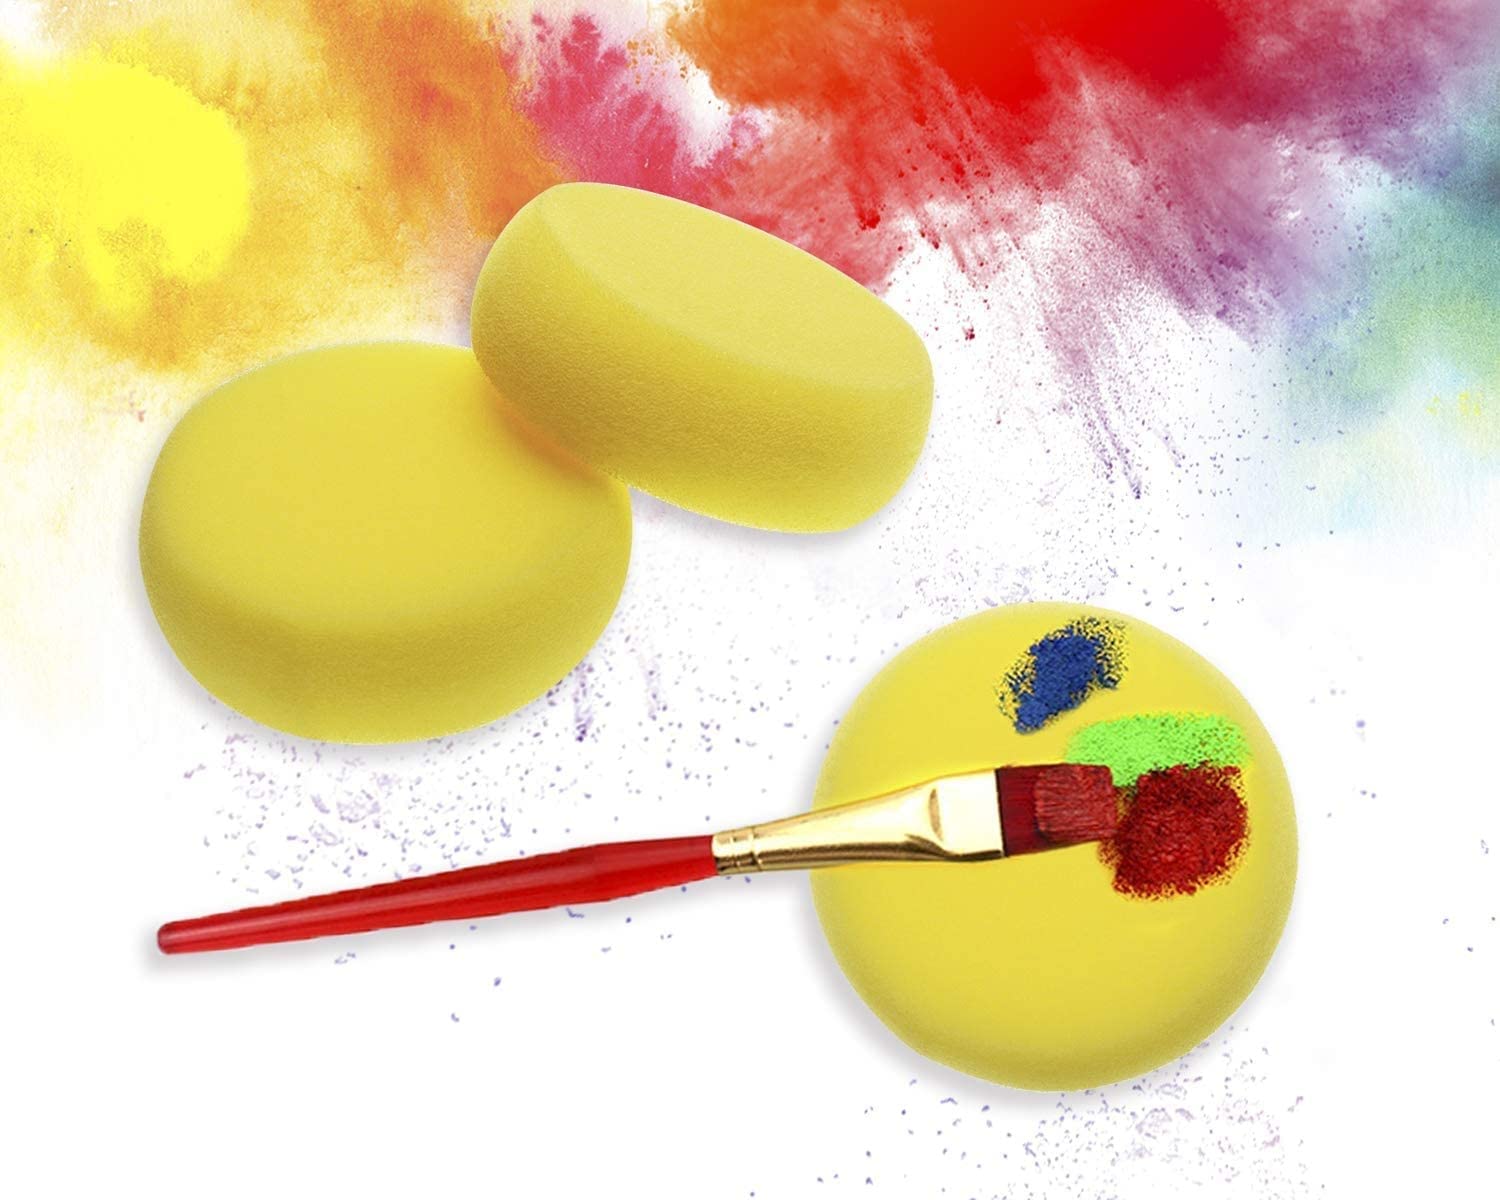 Canvazo Mop Brush for Painting Artist Painting